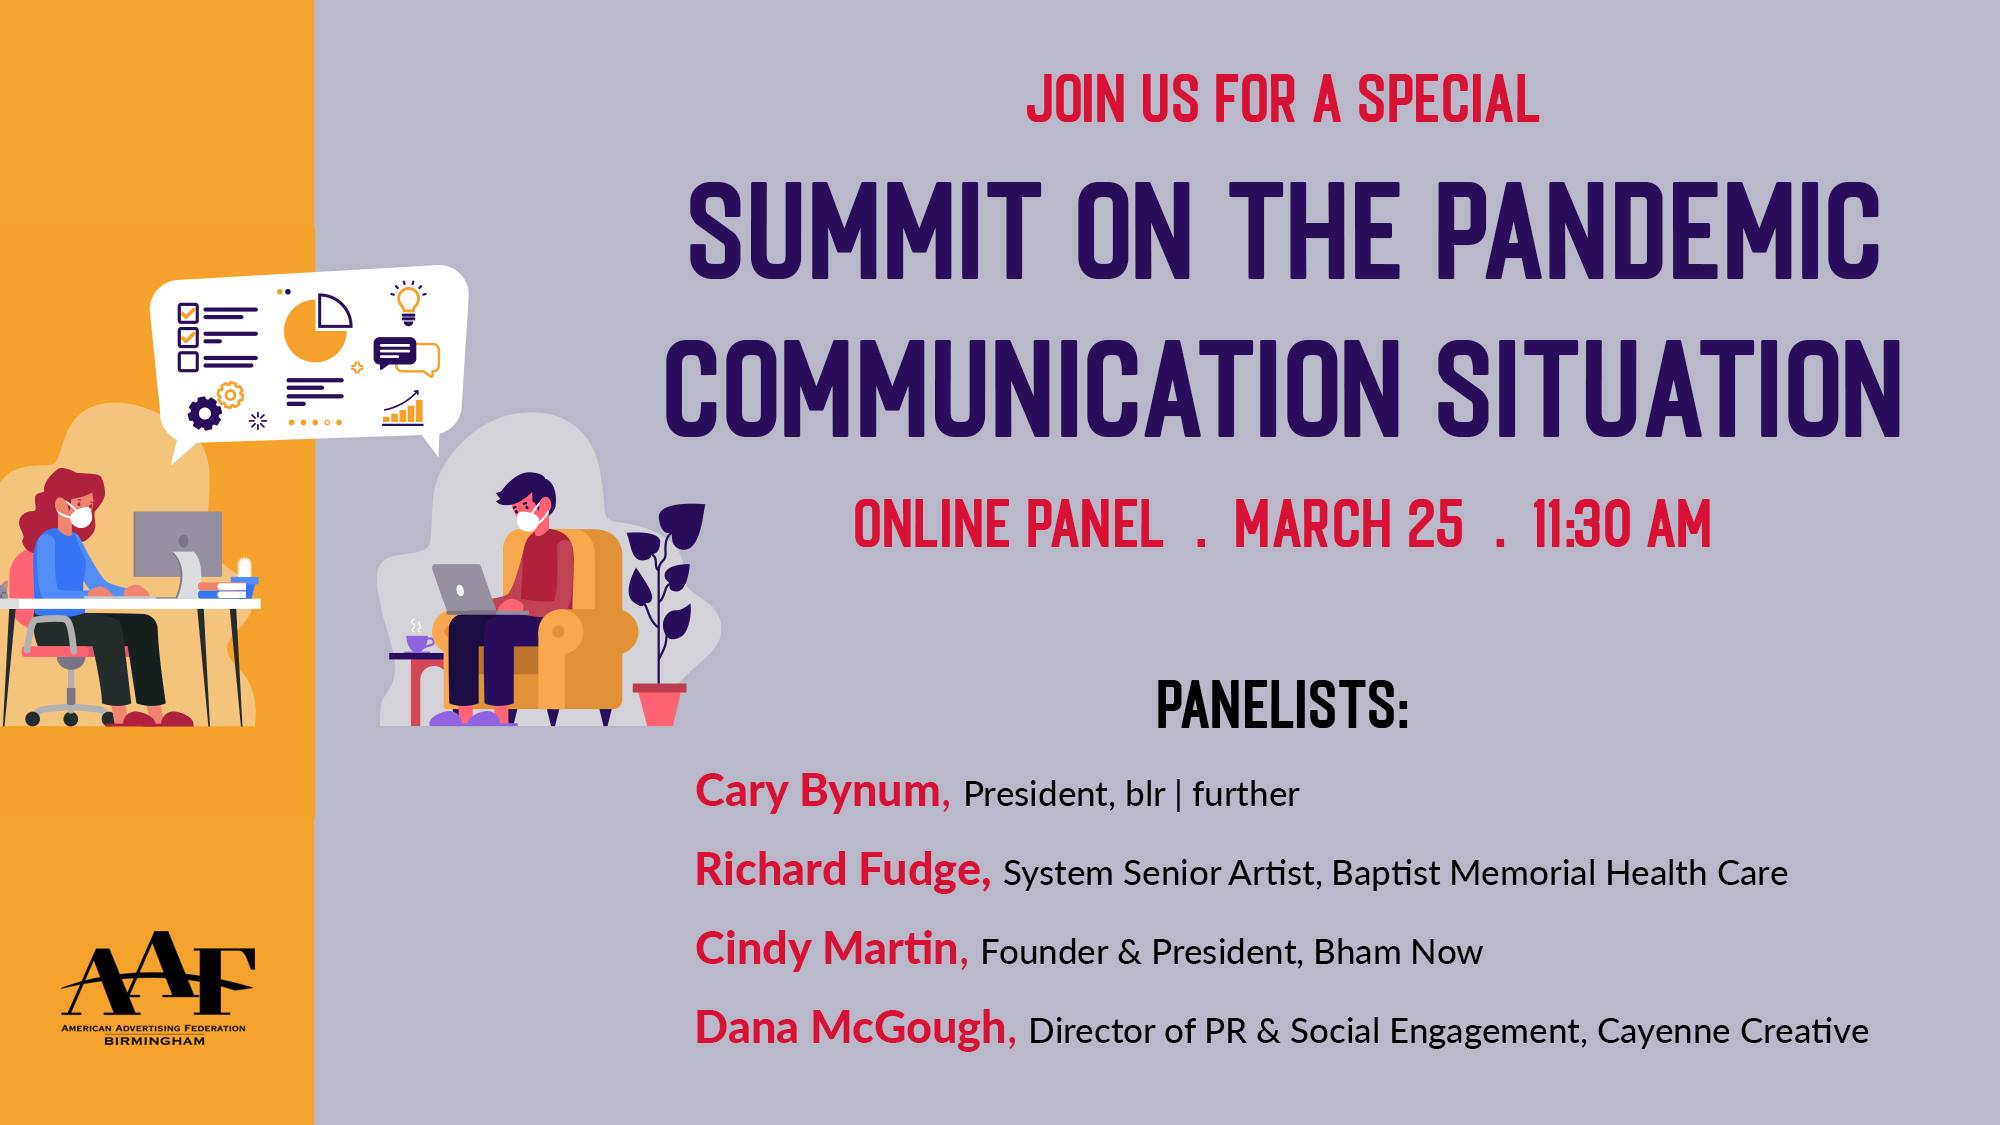 AAF Over 65 marketing execs joined virtual summit on how to communicate during pandemic.